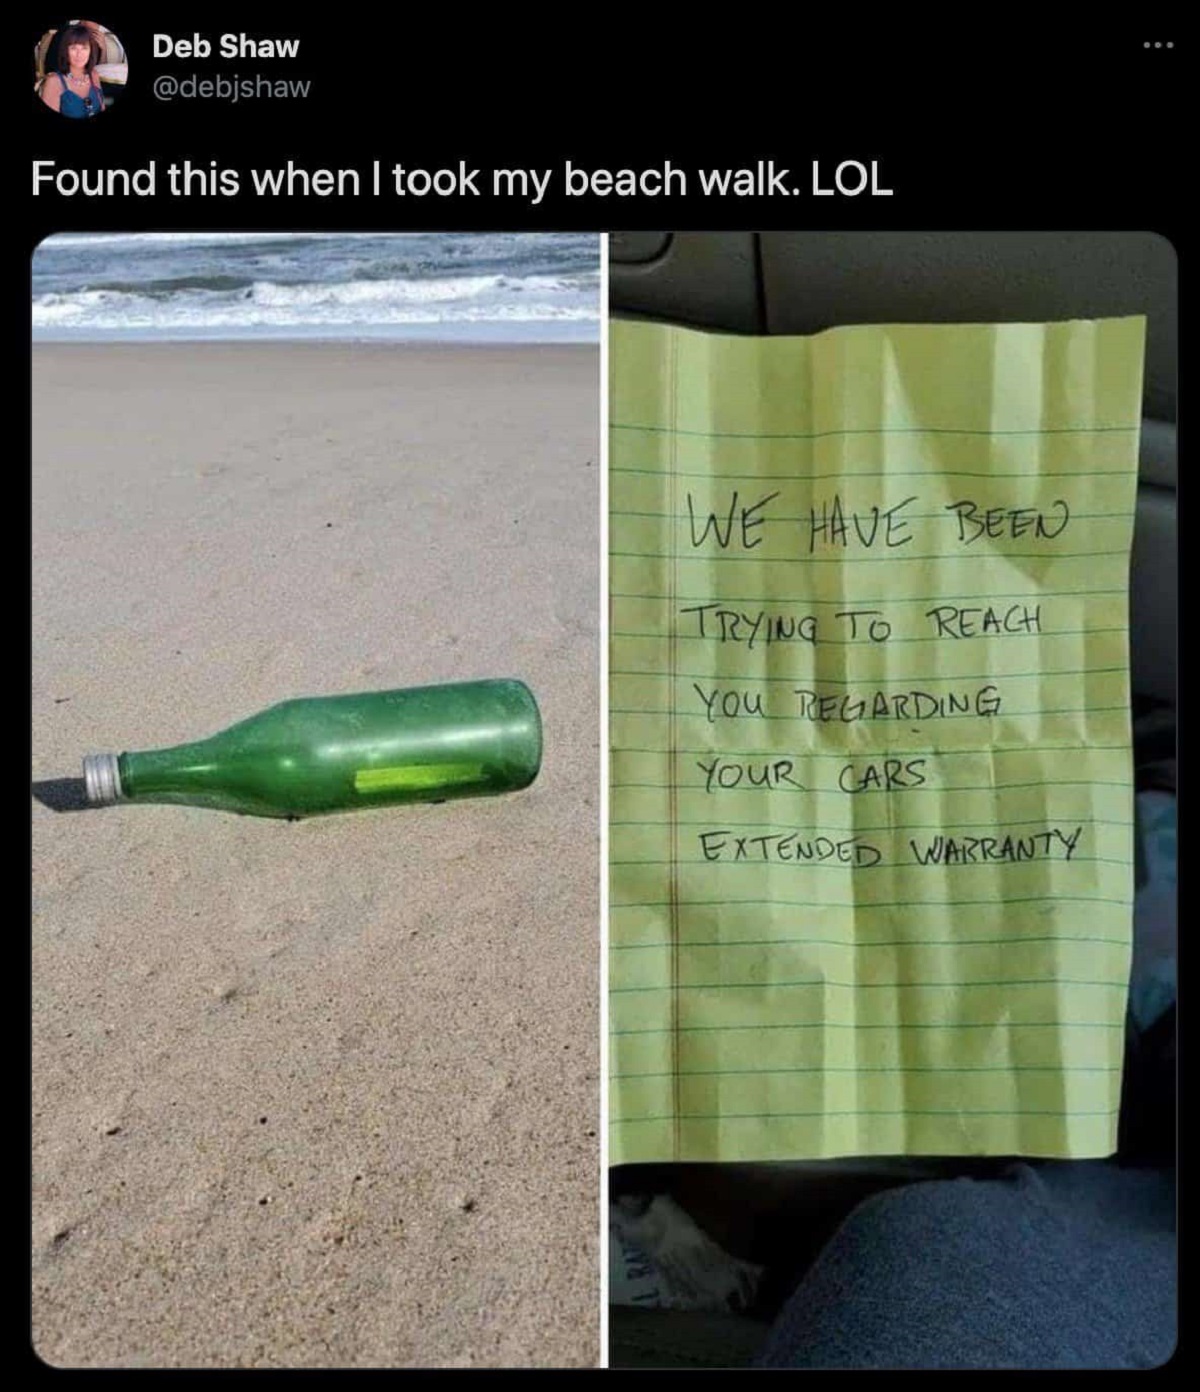 message in a bottle meme - Deb Shaw Found this when I took my beach walk. Lol We Have Been Trying To Reach You Regarding Your Cars Extended Warranty